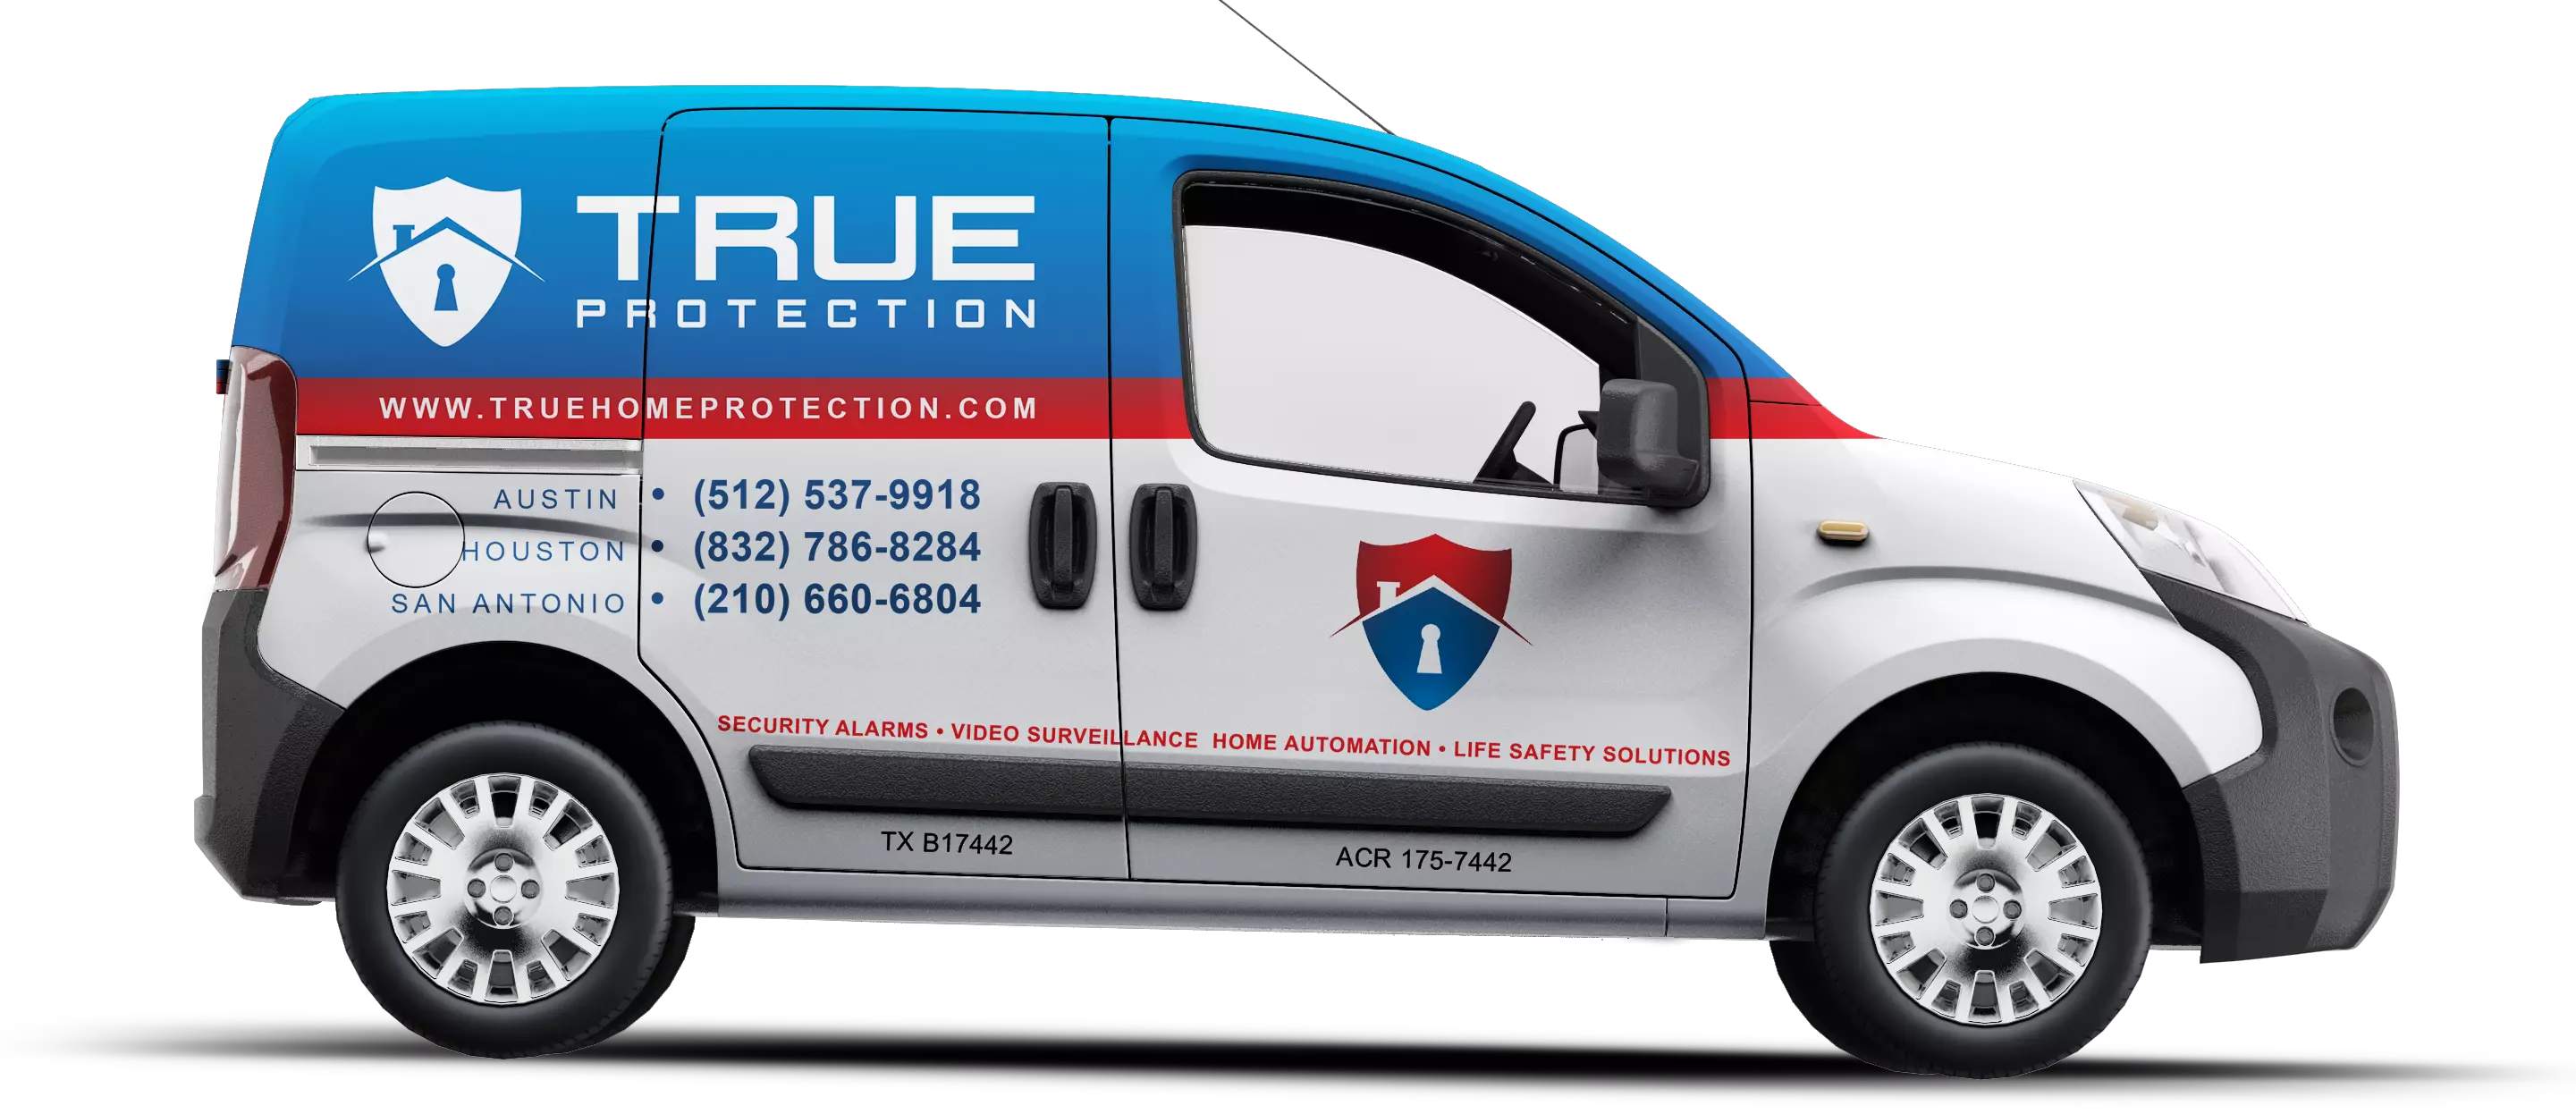 True Protection Security Company